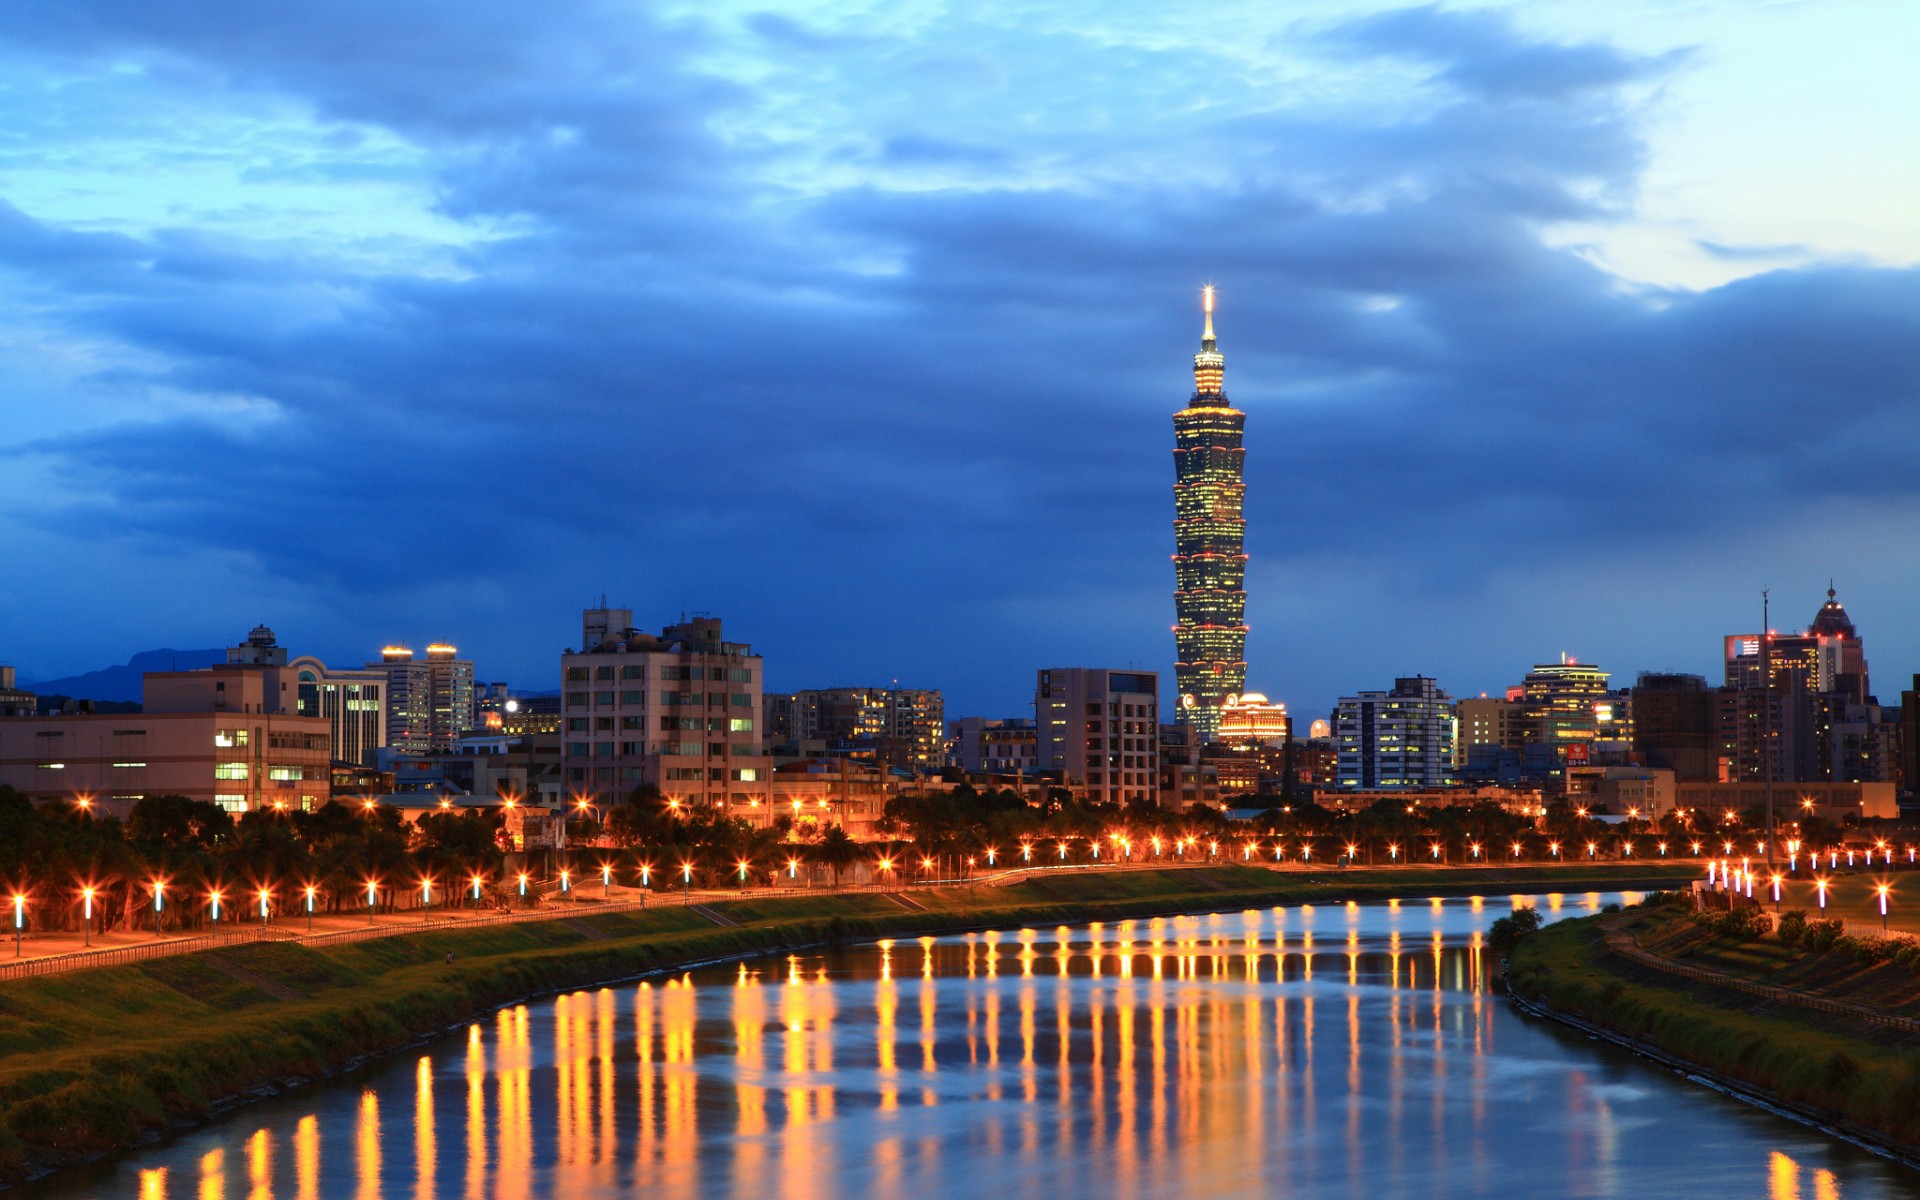 china, Taiwan, Taipei, City, River, Night, Sky, Clouds, Lights, Reflection, Buildings, Skyscraper, Sky, Clouds Wallpaper